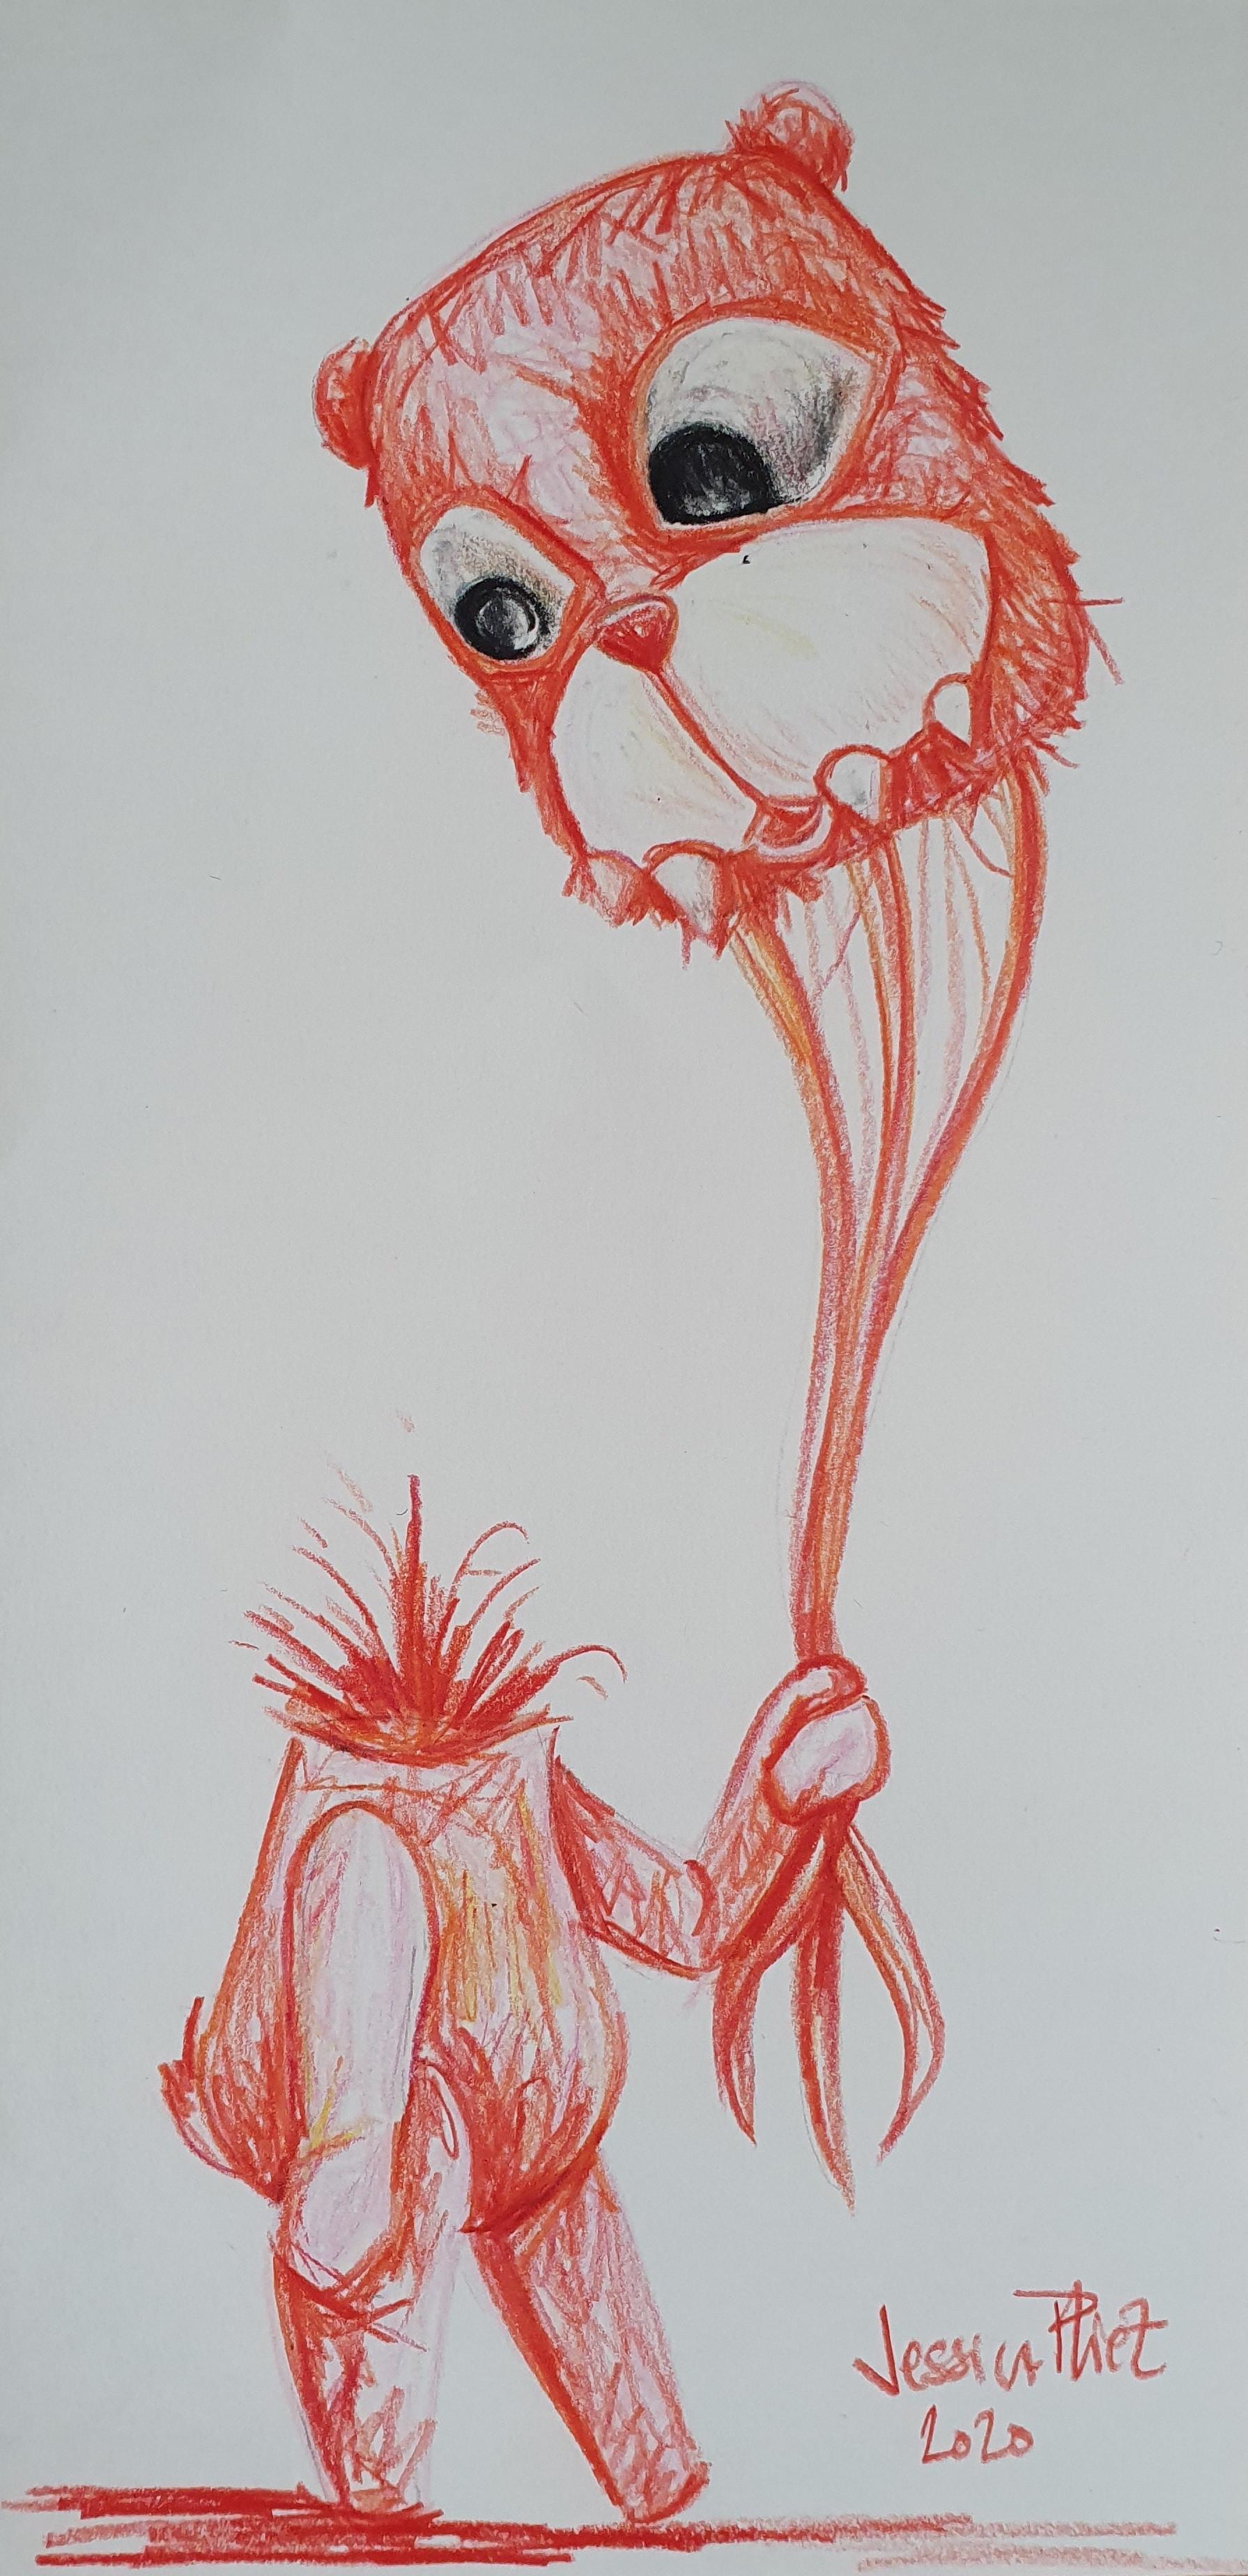 Jessica Pliez, artist in the poetic and infantile world, which reminds one of the filmmaker Tim Burton, loves the surprising supports.

2020
Drawing / pencil on cardboard
24 x 12 cm
Original work signed
Artist's certificate
Selling price: 120 euros